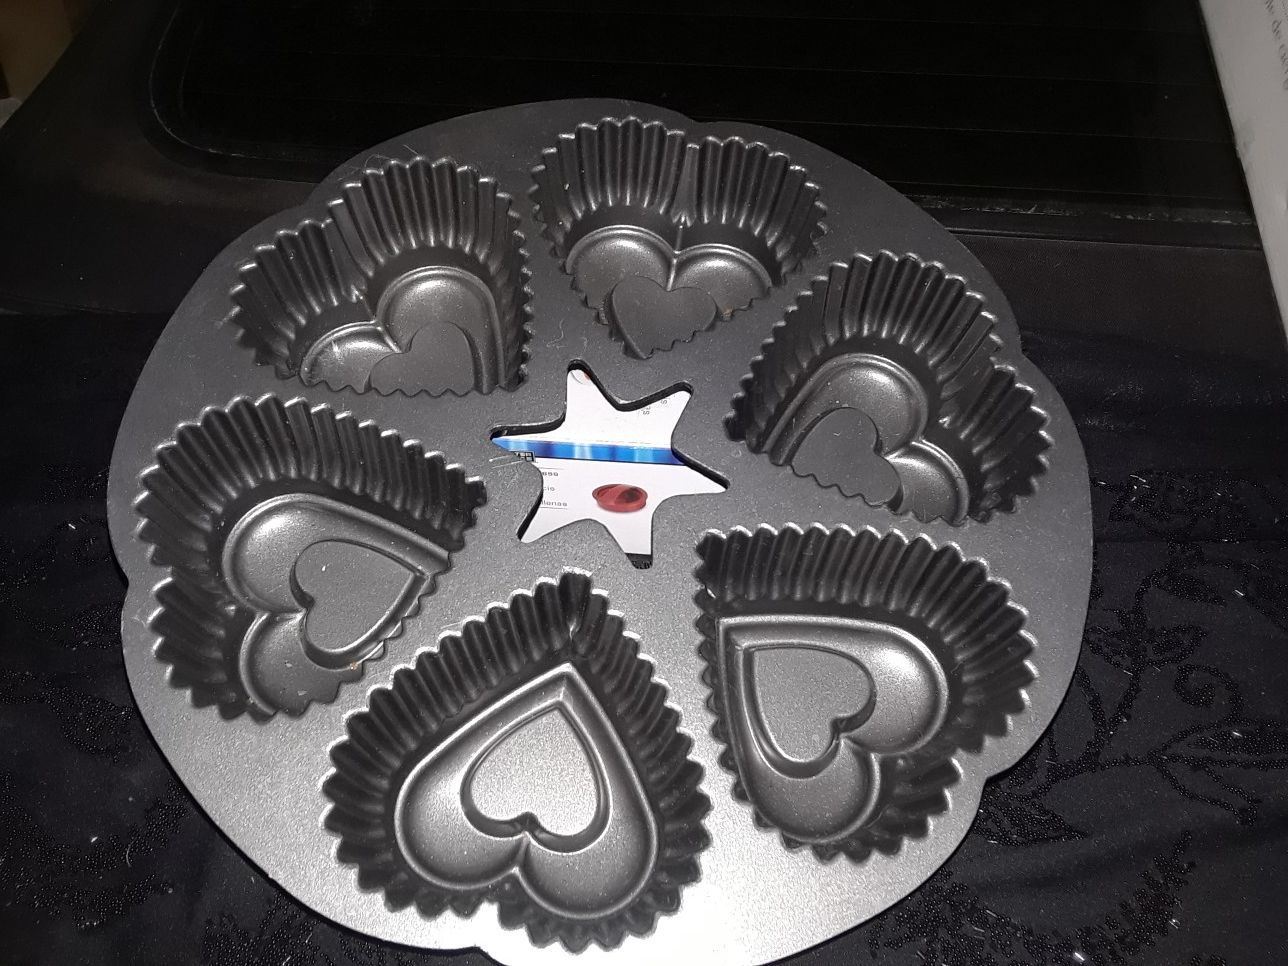 Large heart shaped muffin tins